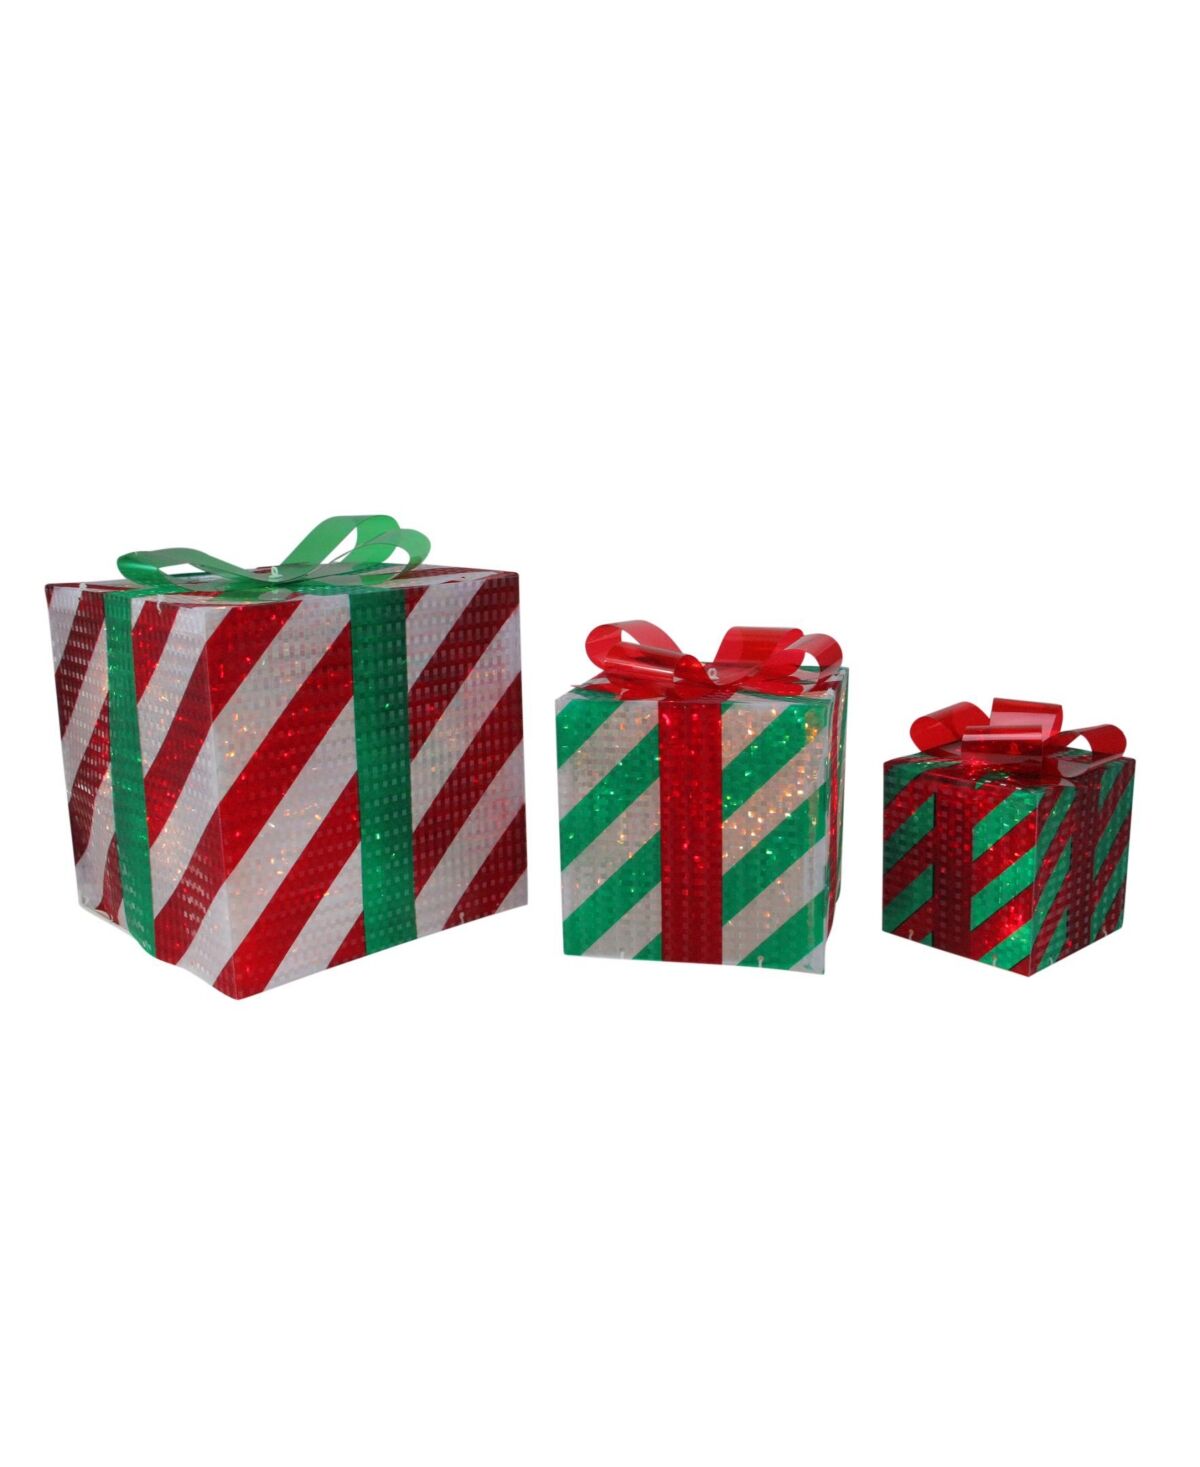 Northlight 3-Piece Glistening Striped Lighted Gift Box Outdoor Christmas Decoration - Multi